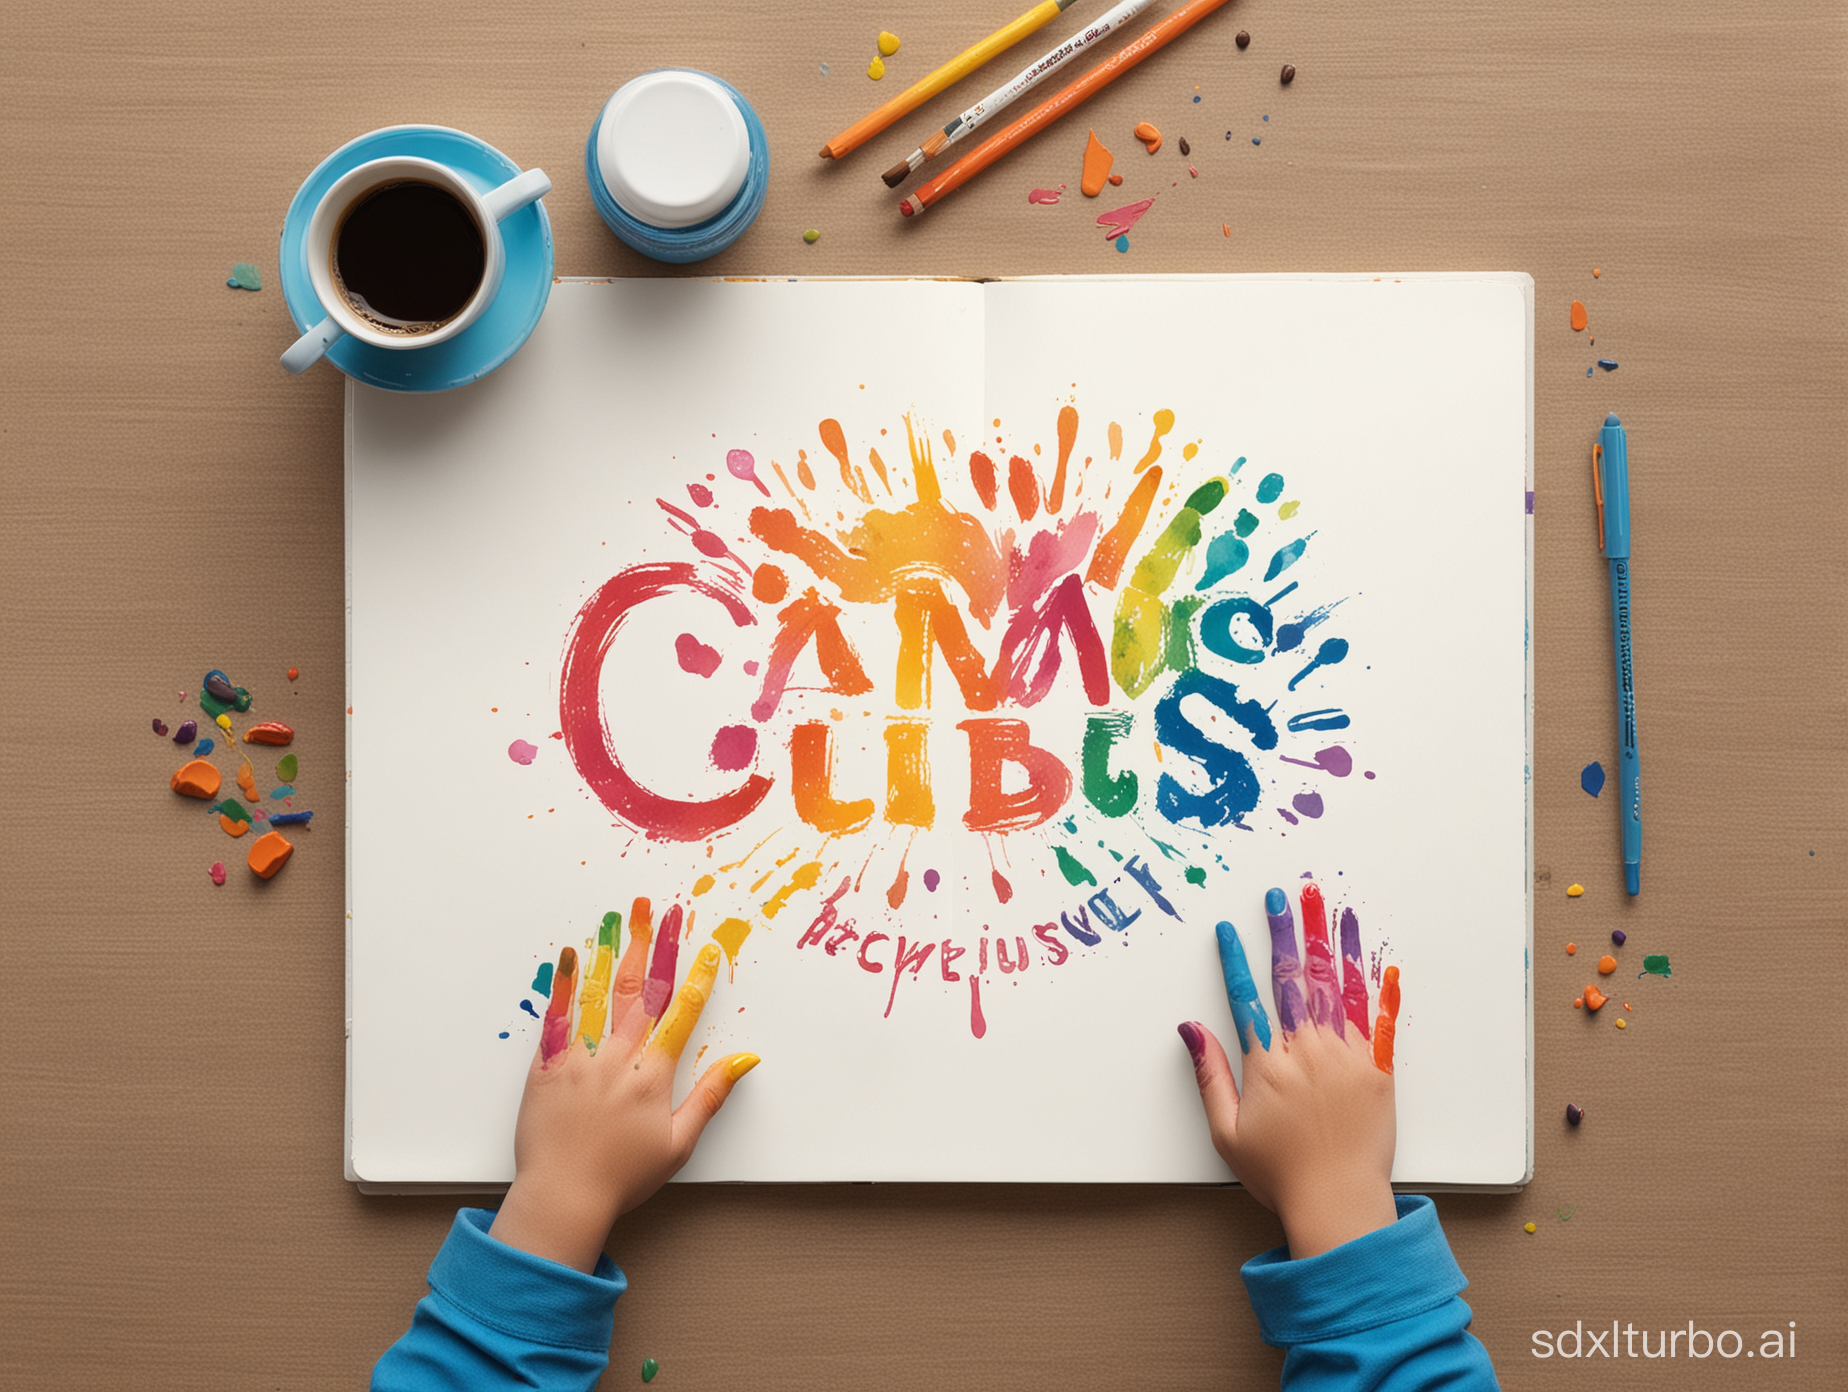 Create a vibrant and engaging logo for Canvas Cubs, a company specializing in digitizing children's artwork and transforming them into cherished coffee table books. The logo should feature a colorful graphic depicting a young child with hands raised, displaying paint or color on their palms, and wearing a bright smile. Incorporate the "Canvas Cubs" text in a playful and appealing font, seamlessly blending with the imagery. Capture the essence of creativity, joy, and innocence in the design to resonate with the target audience of parents and families.